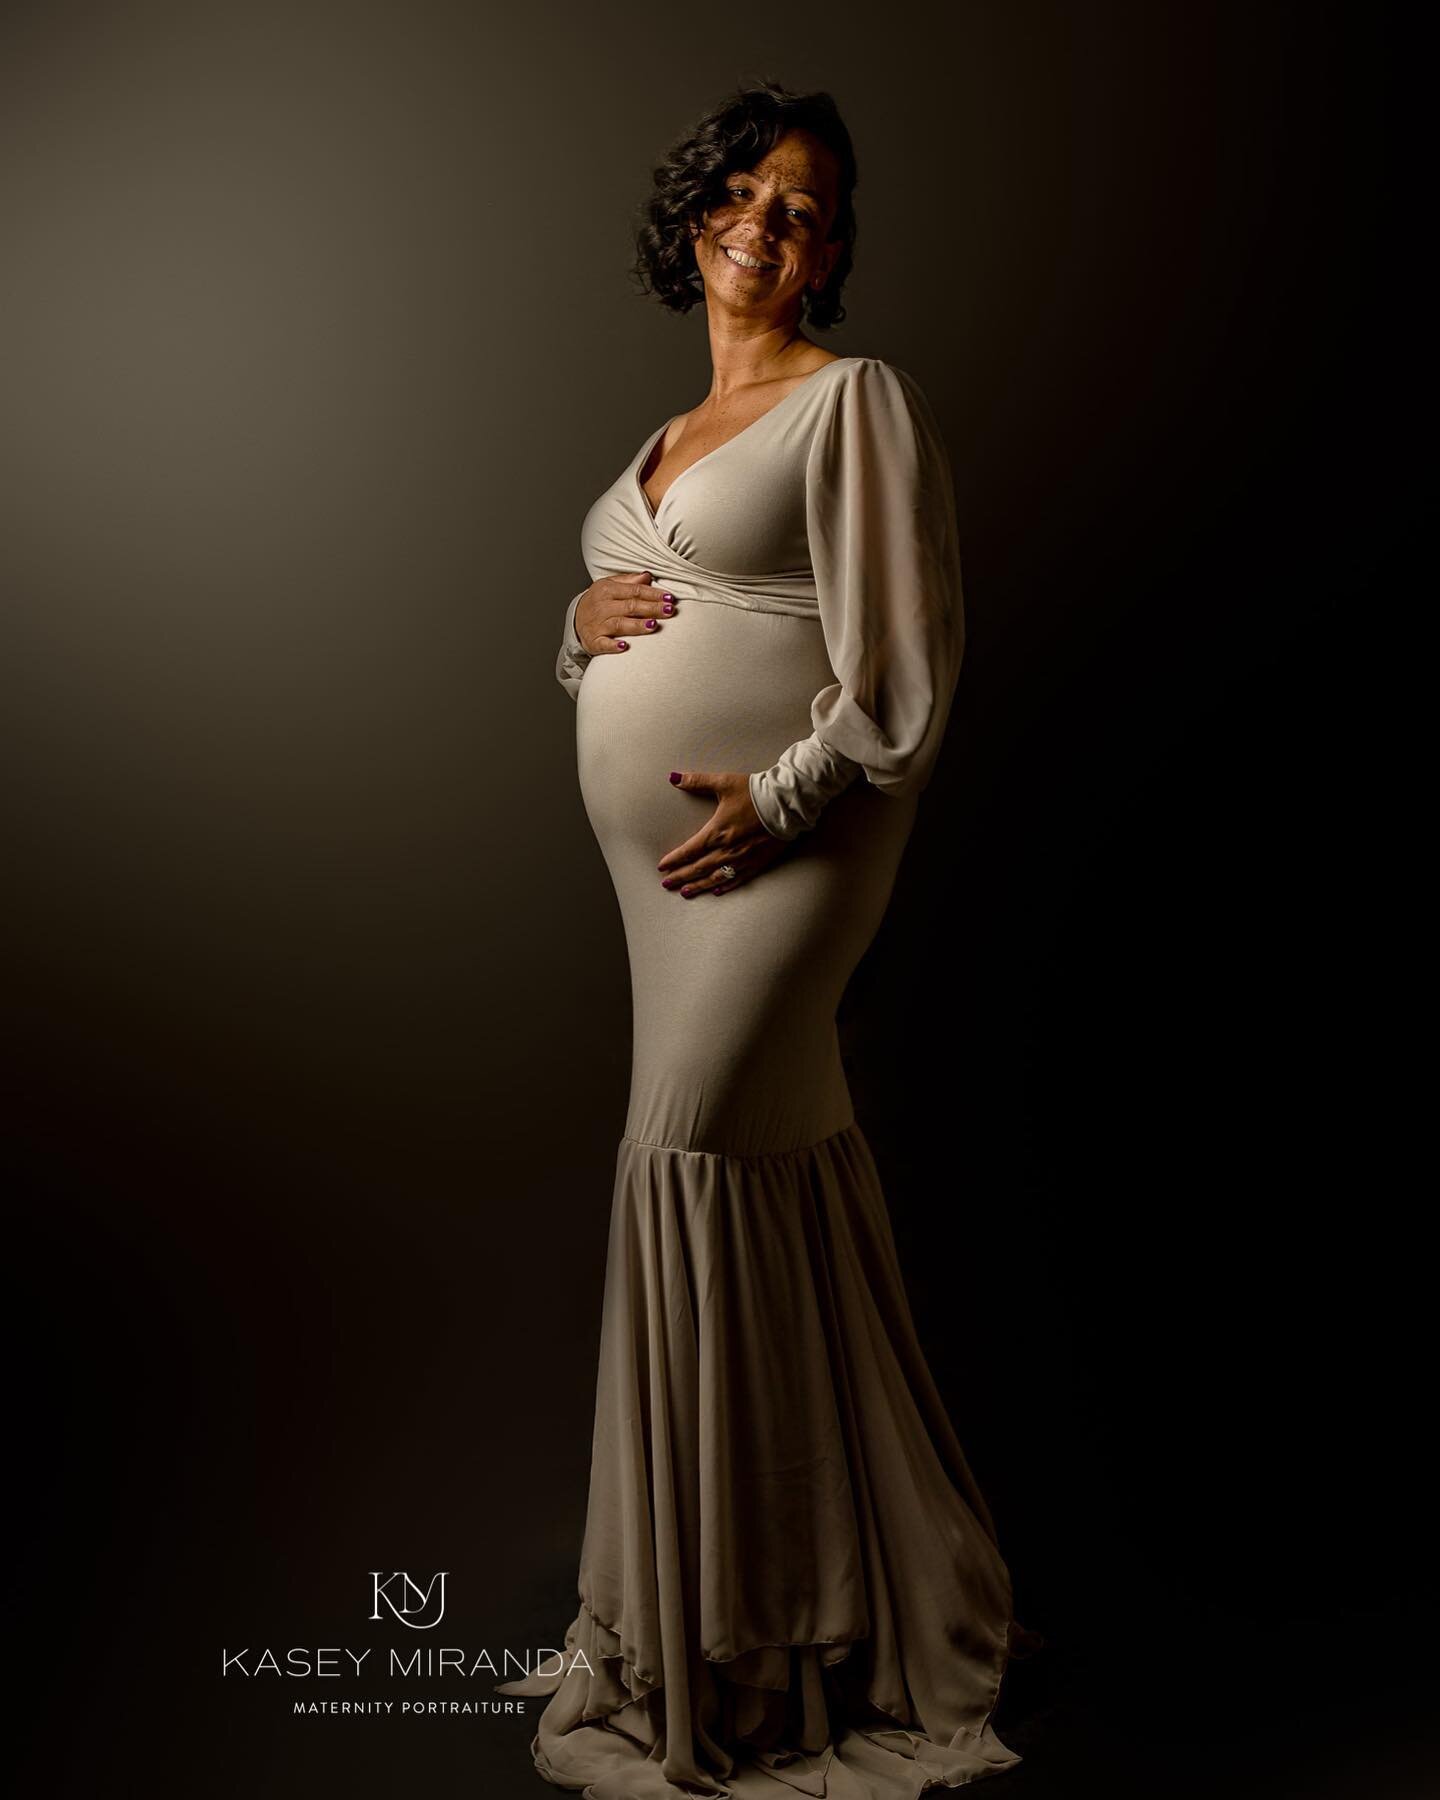 &ldquo;It may be possible to gild pure gold, but who can make his mother more beautiful?&rdquo;

-Mahatma Ghandi 

Happy Mother&rsquo;s Day to everyone ❤️

#delawarematernityphotographer #delawarematernity #philadelphiamaternityphotographer #phillyma